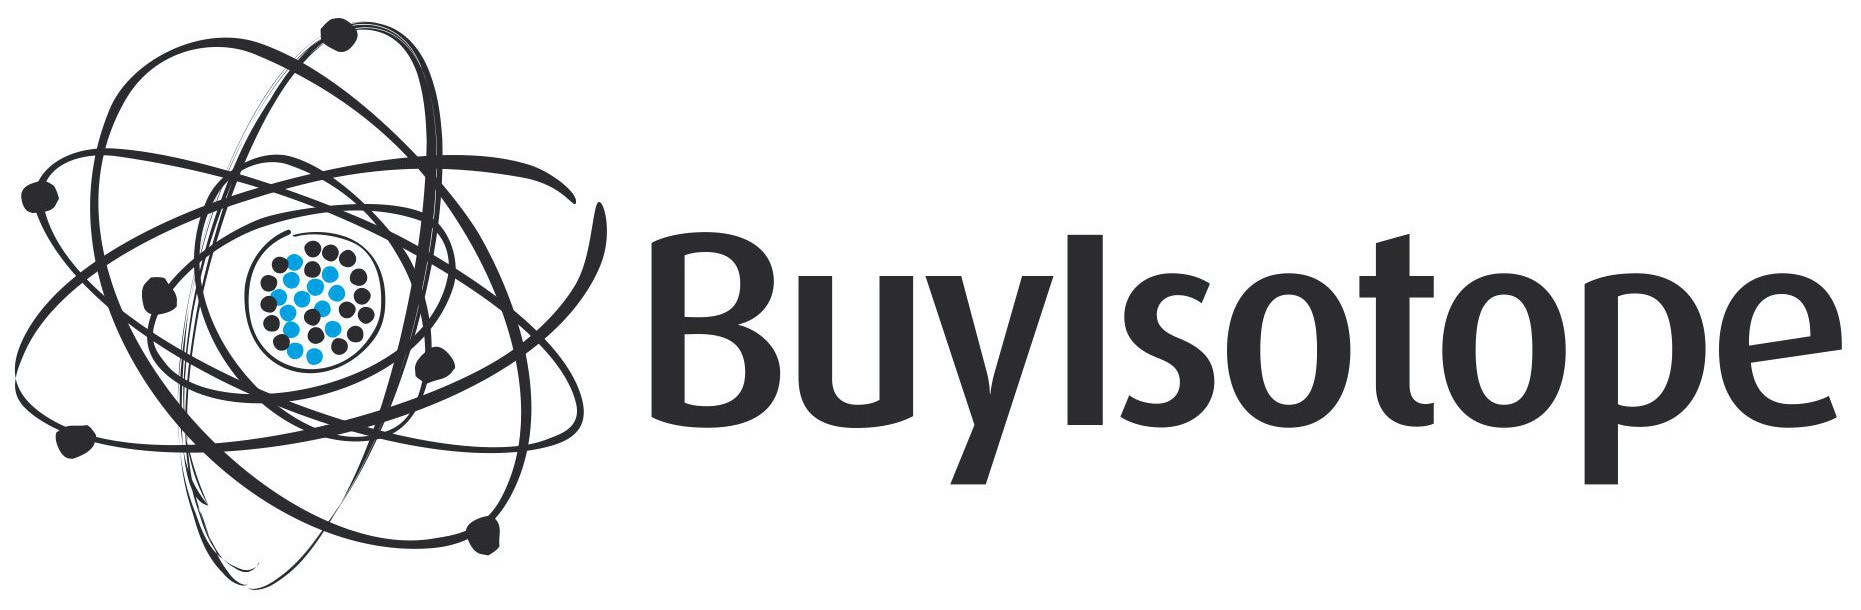 Buyisotope (company: Neonest AB) featured image